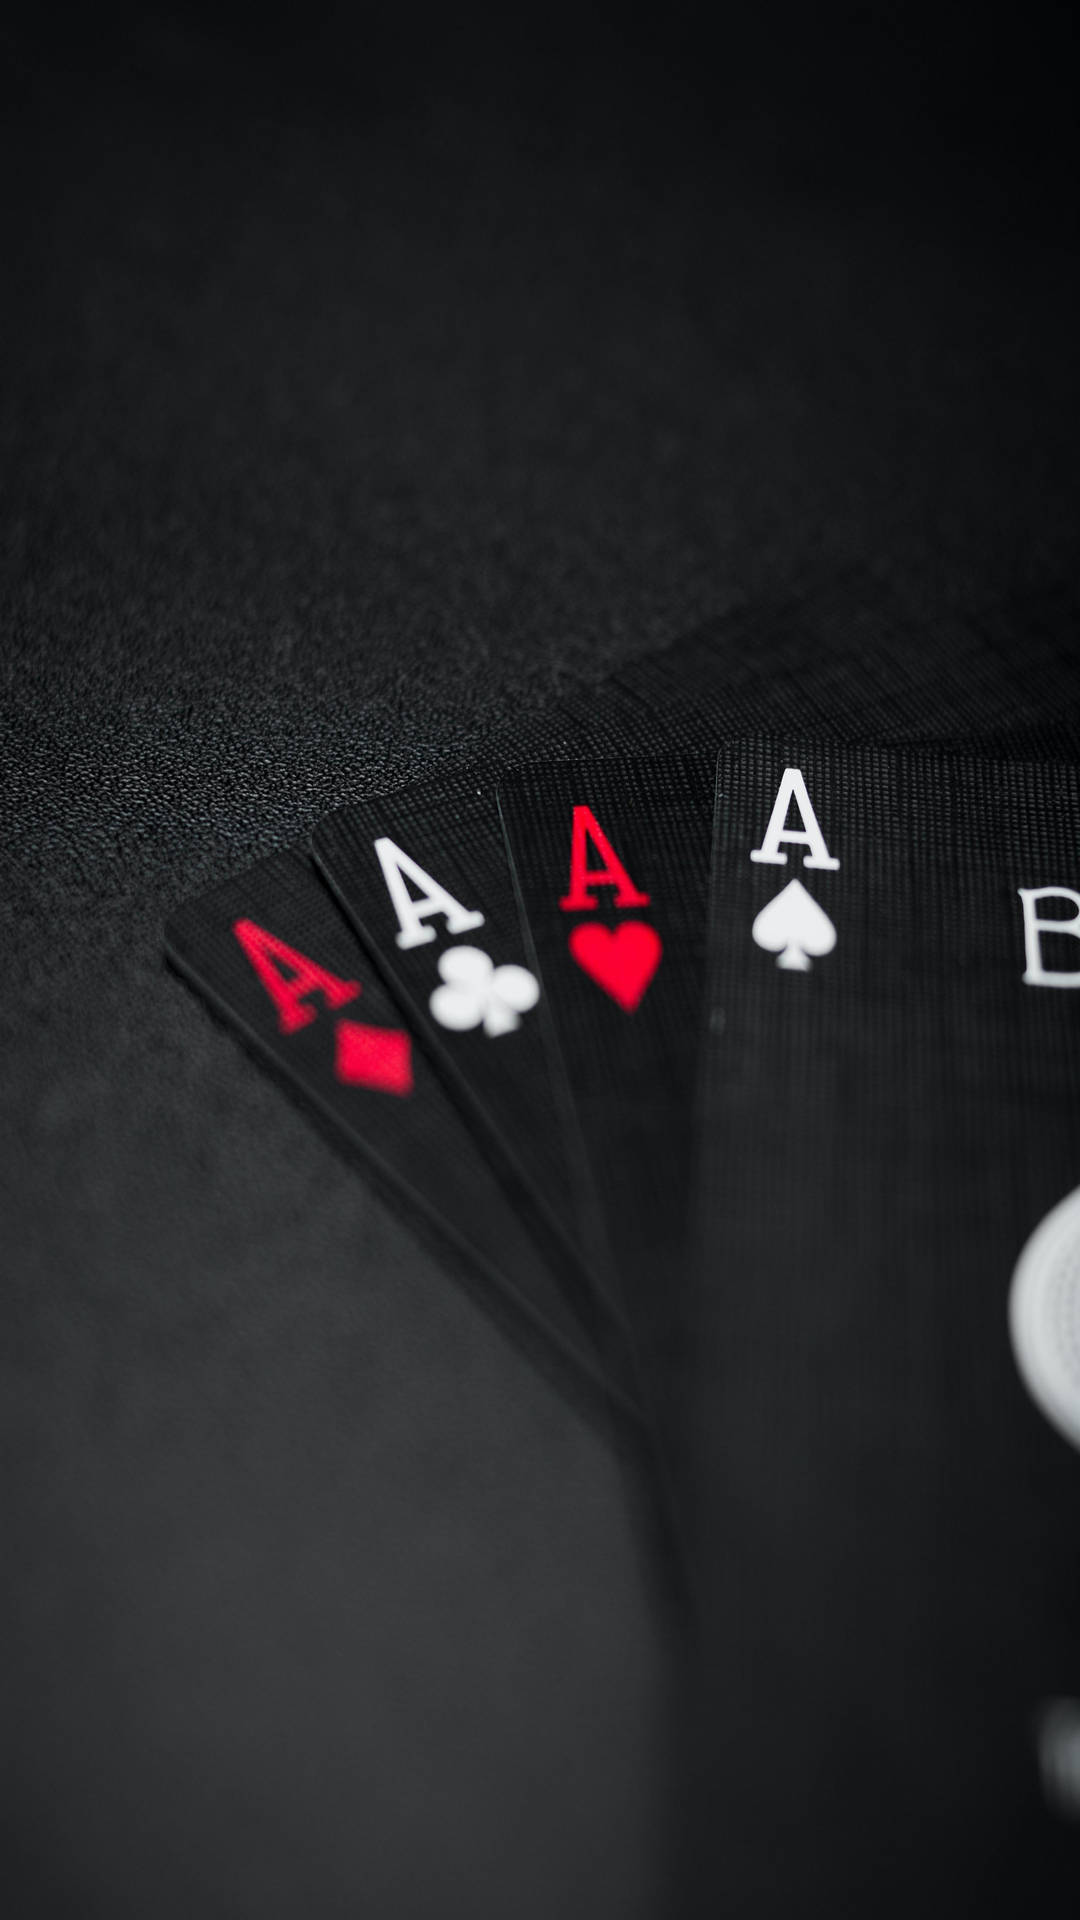 Black Ace Cards Full Hd Phone Background